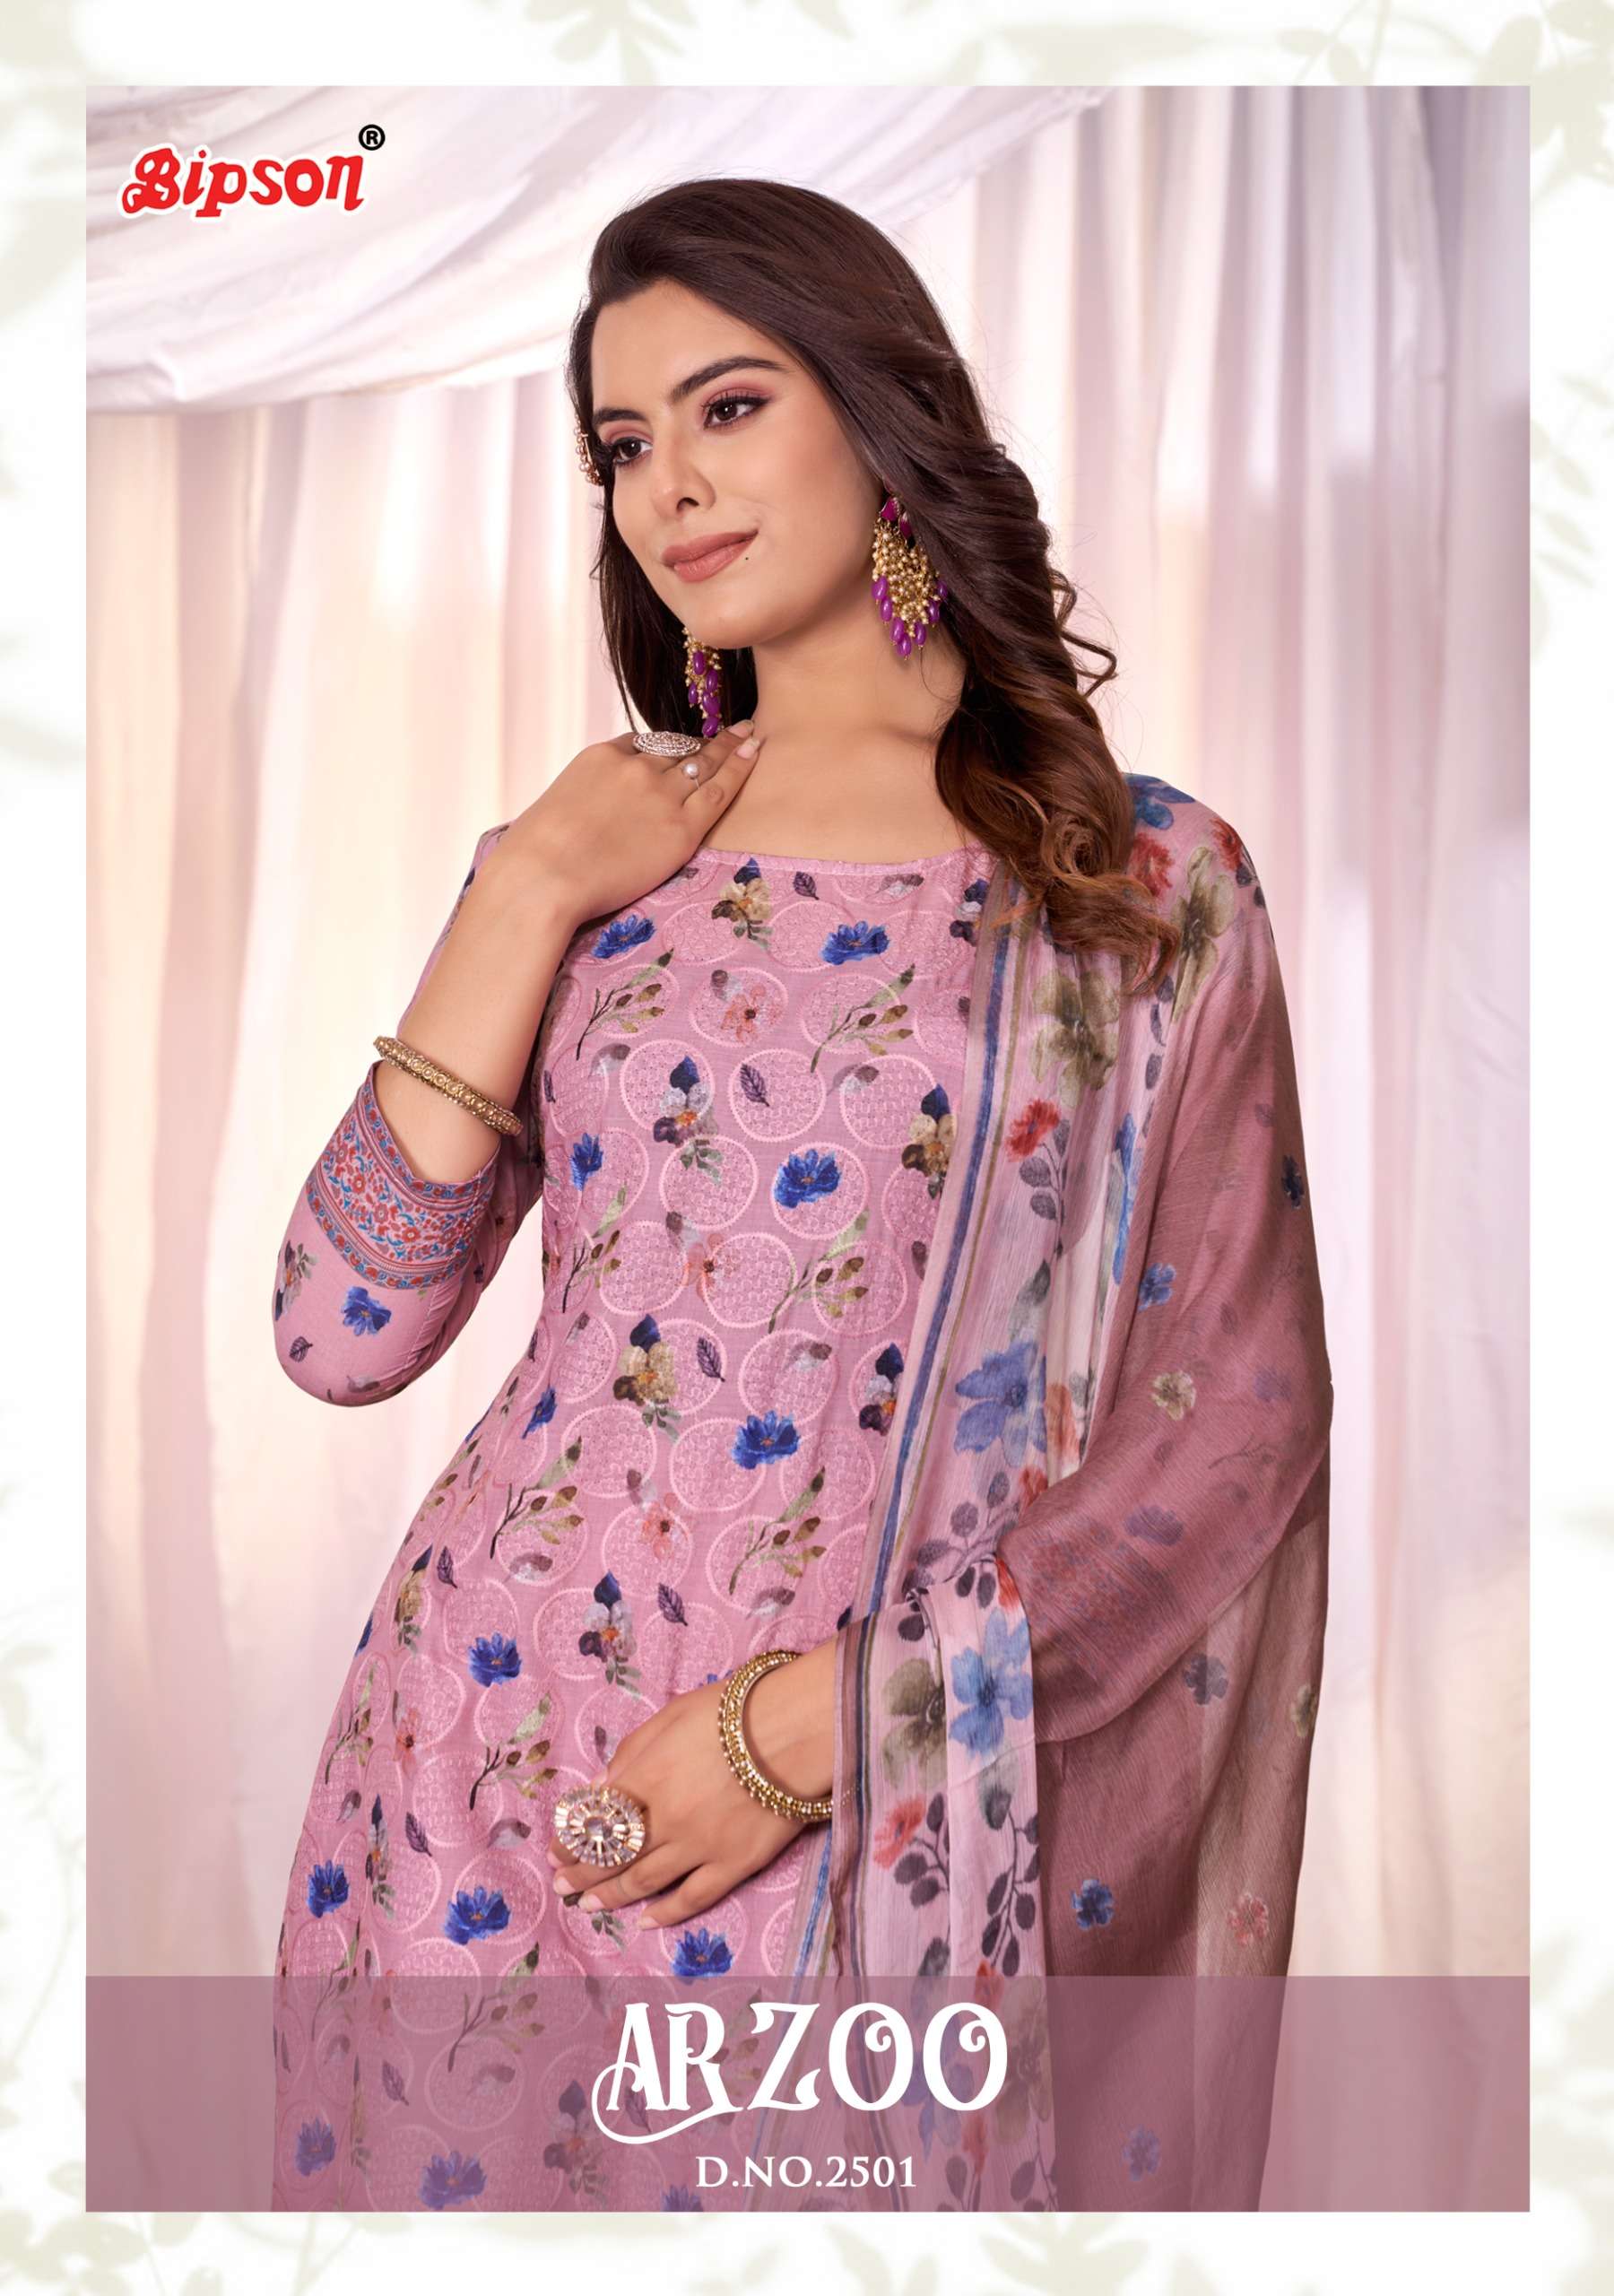 Bipson Aarzoo 2501 Fancy Printed Unstitched Suit Collection